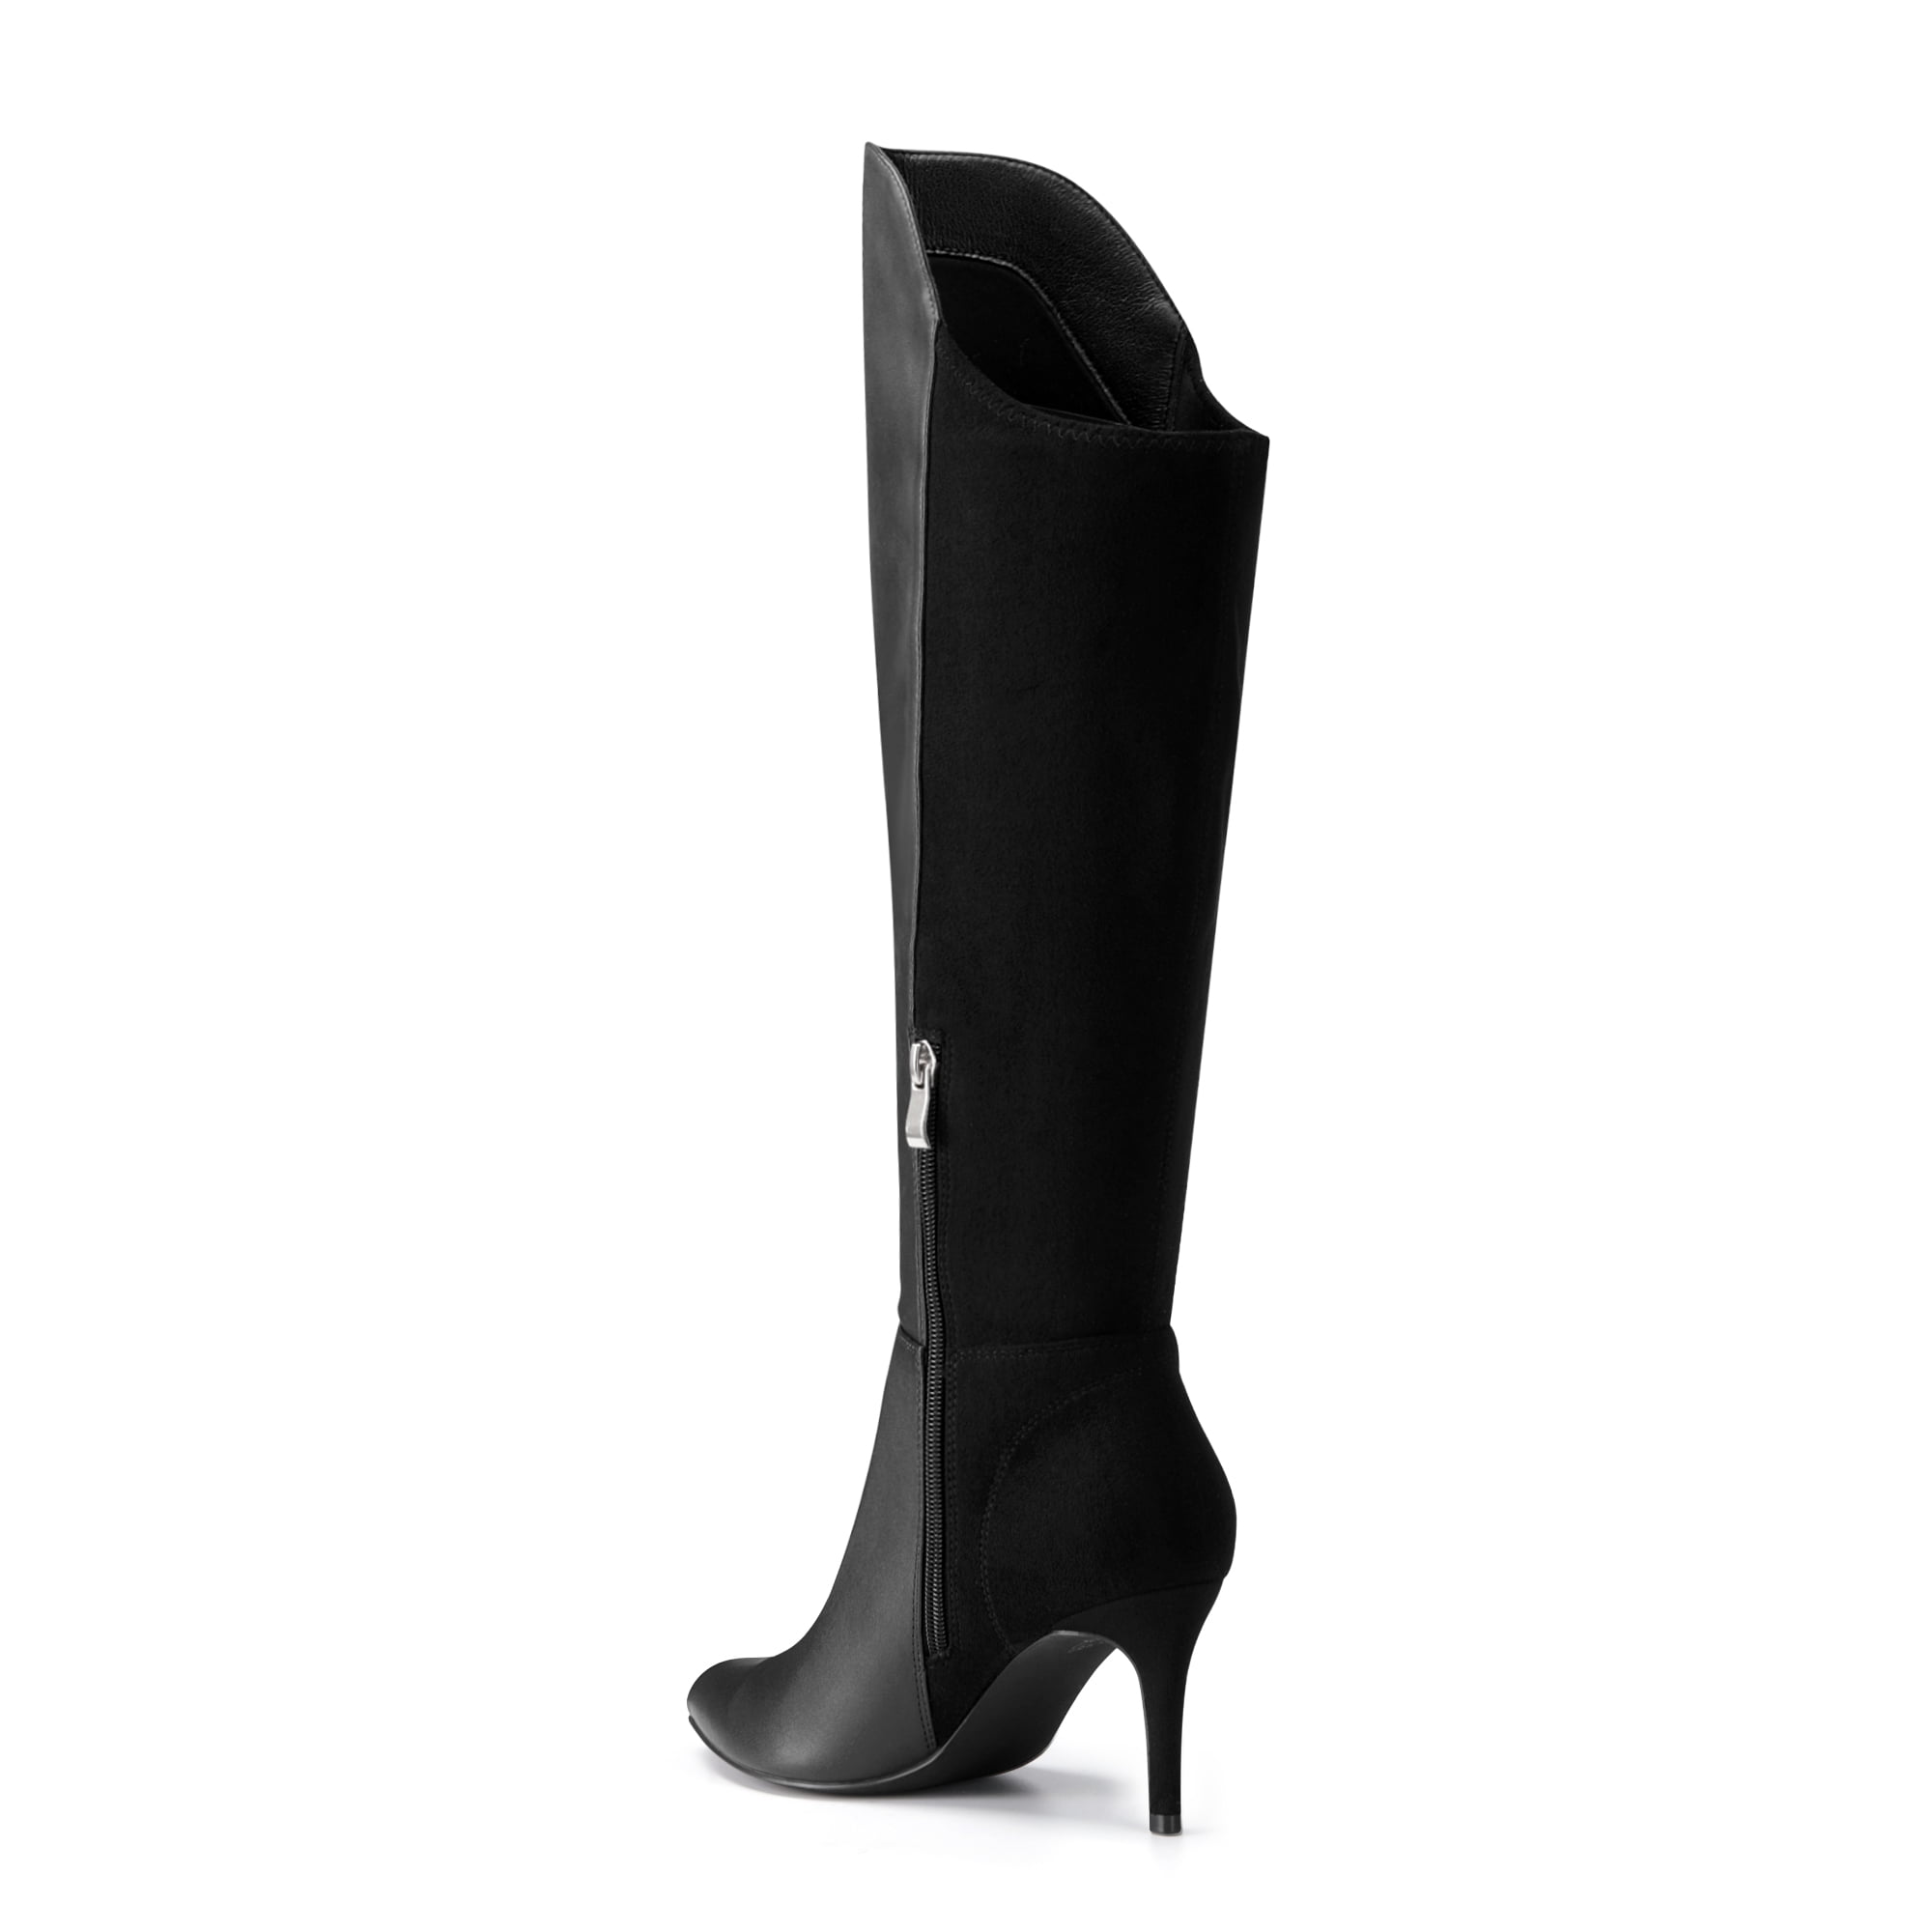 Dream Pairs Women S Knee High Boots Sexy Pointed Toe Zipper High Heel Boots For Women